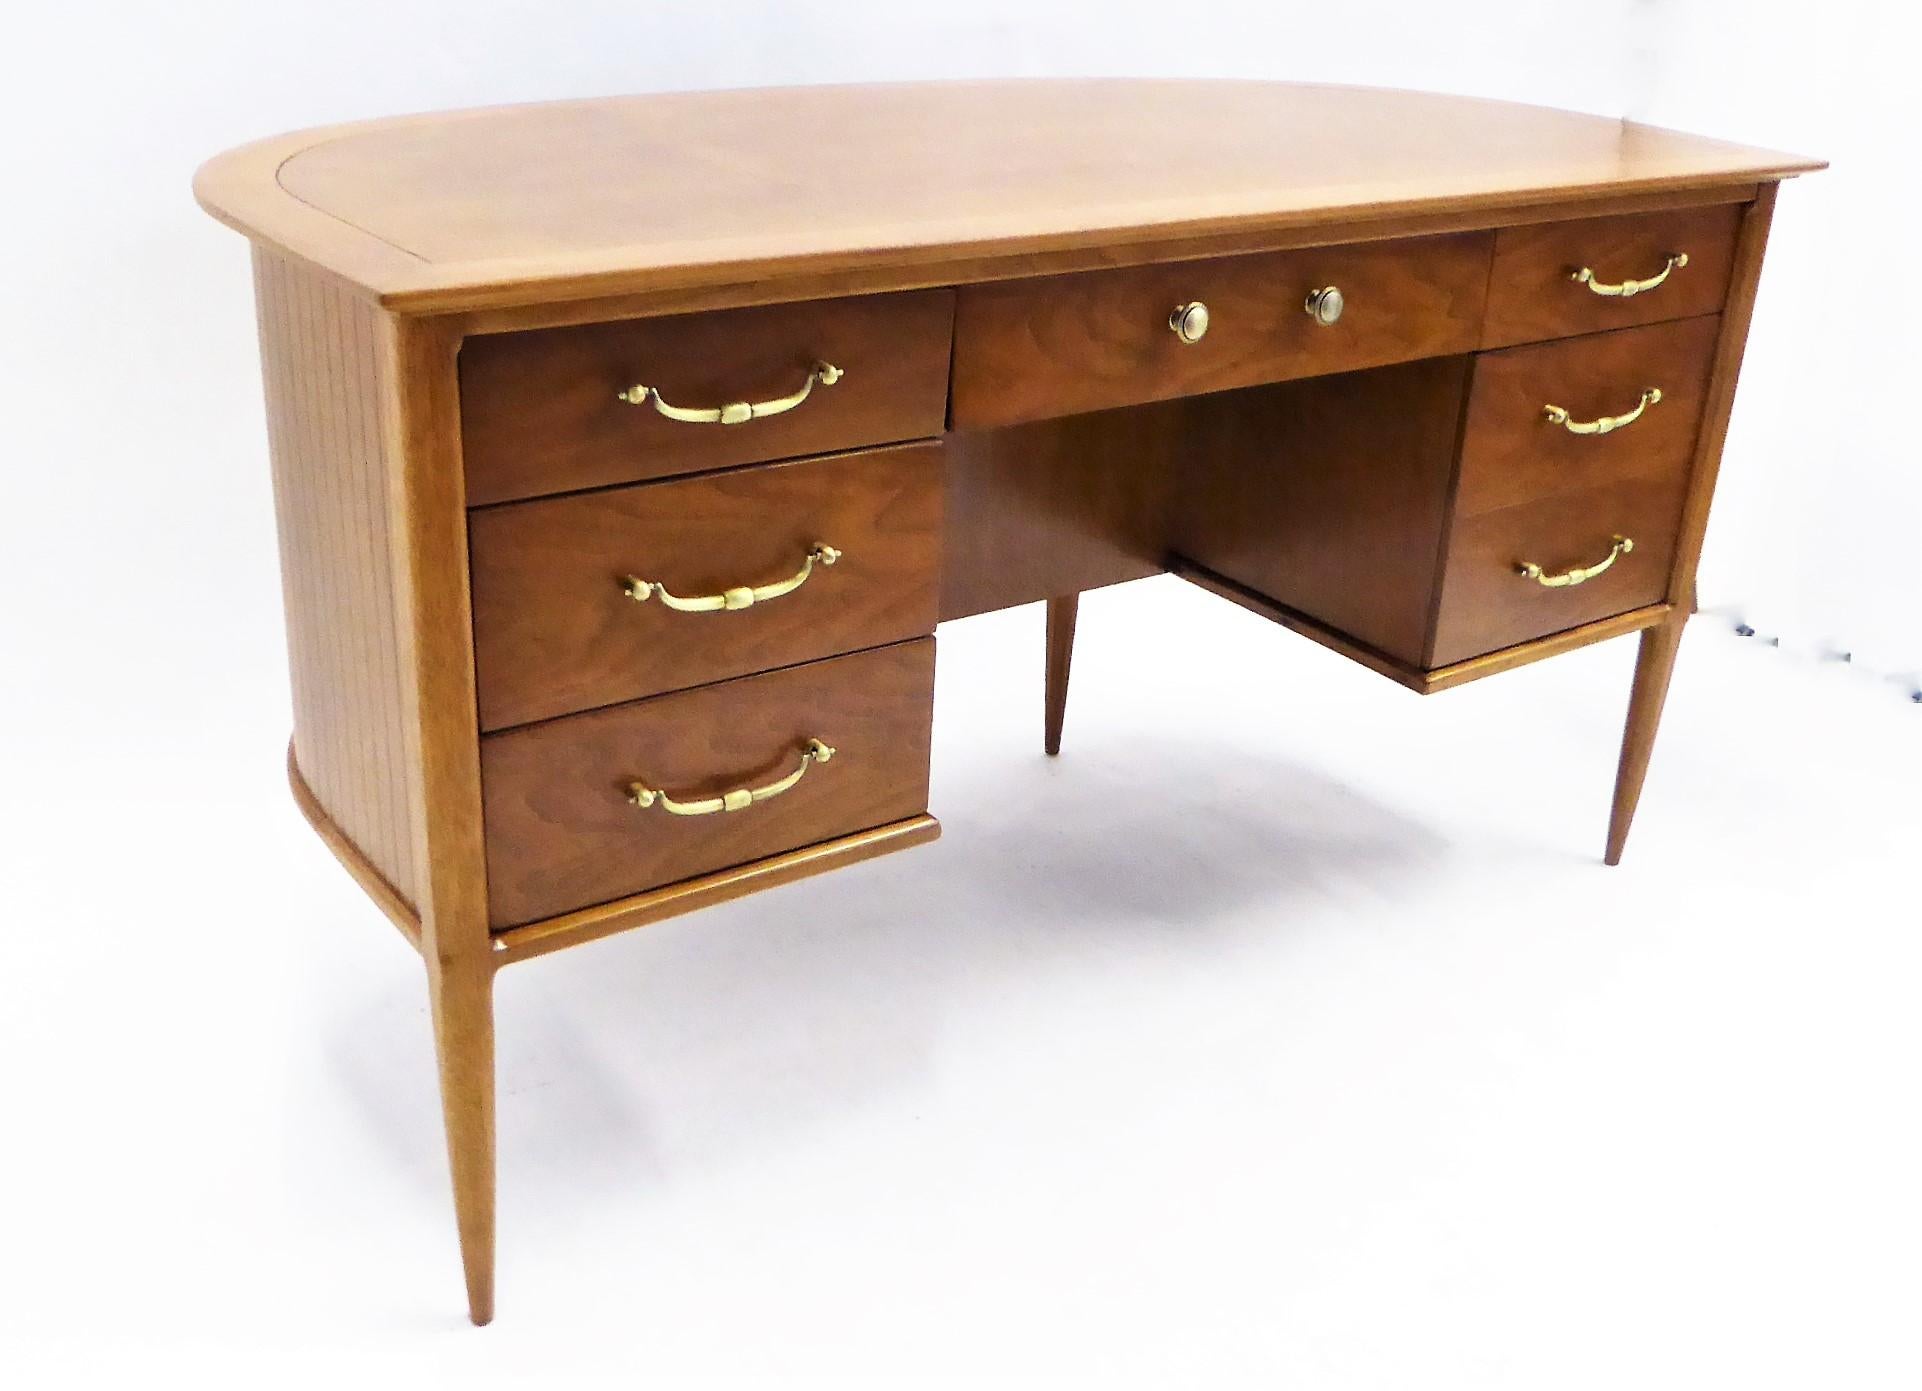 Stunning 1950s walnut desk by John Lubberts & Lambert Mulder for Tomlinson, from the Sophisticates collection. A 